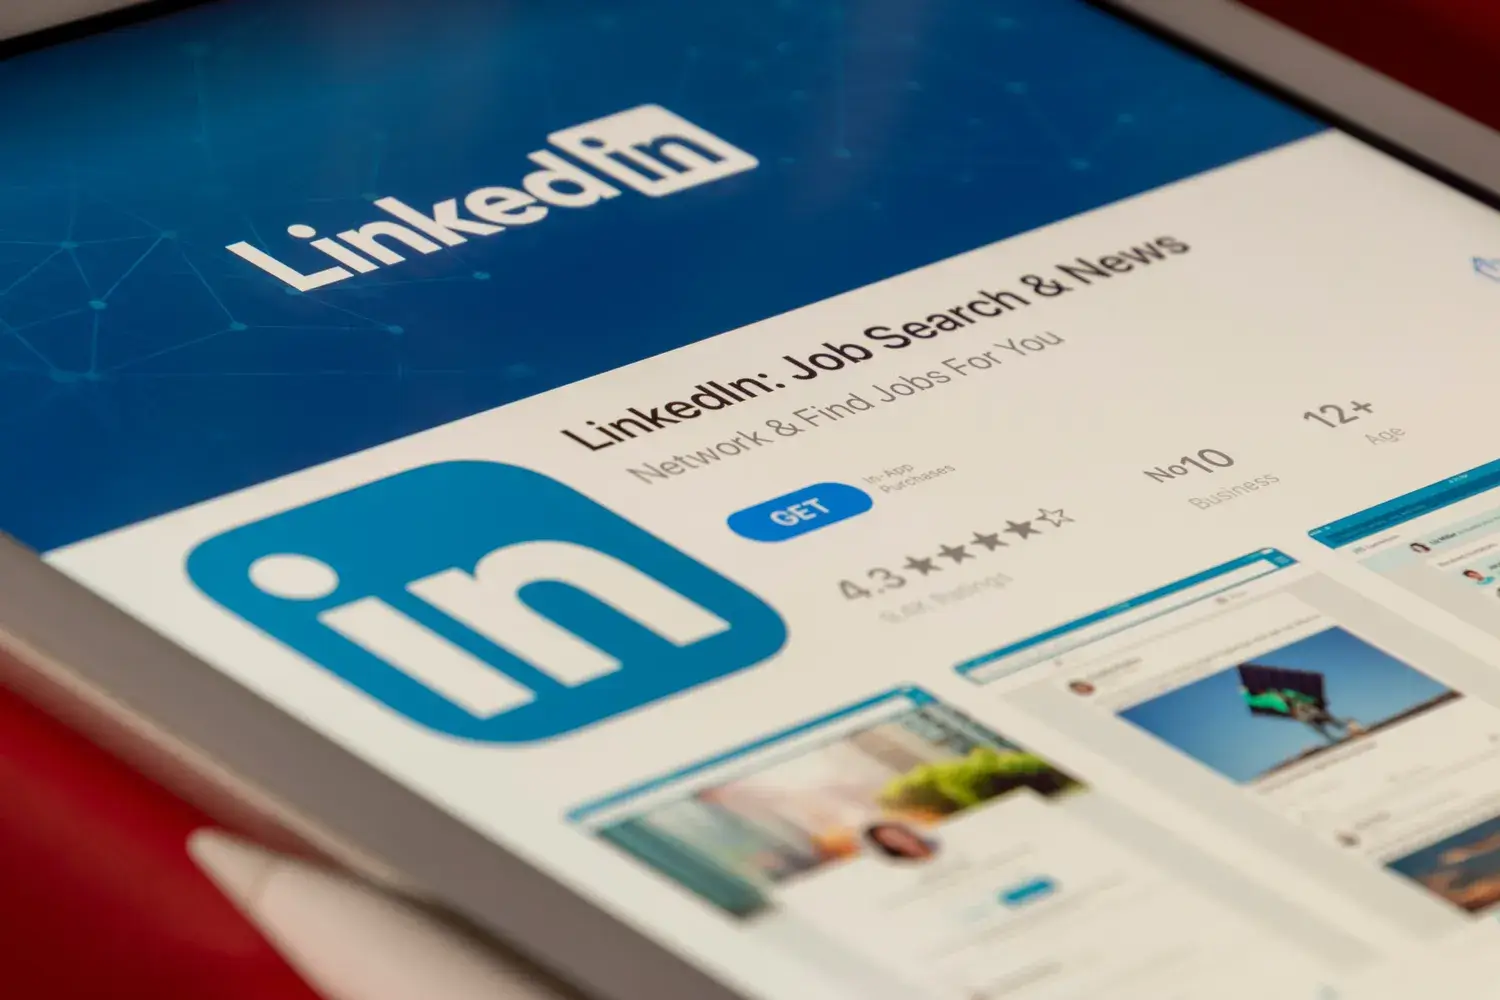 LinkedIn: Your Gateway to Opportunity, But Beware of Scams